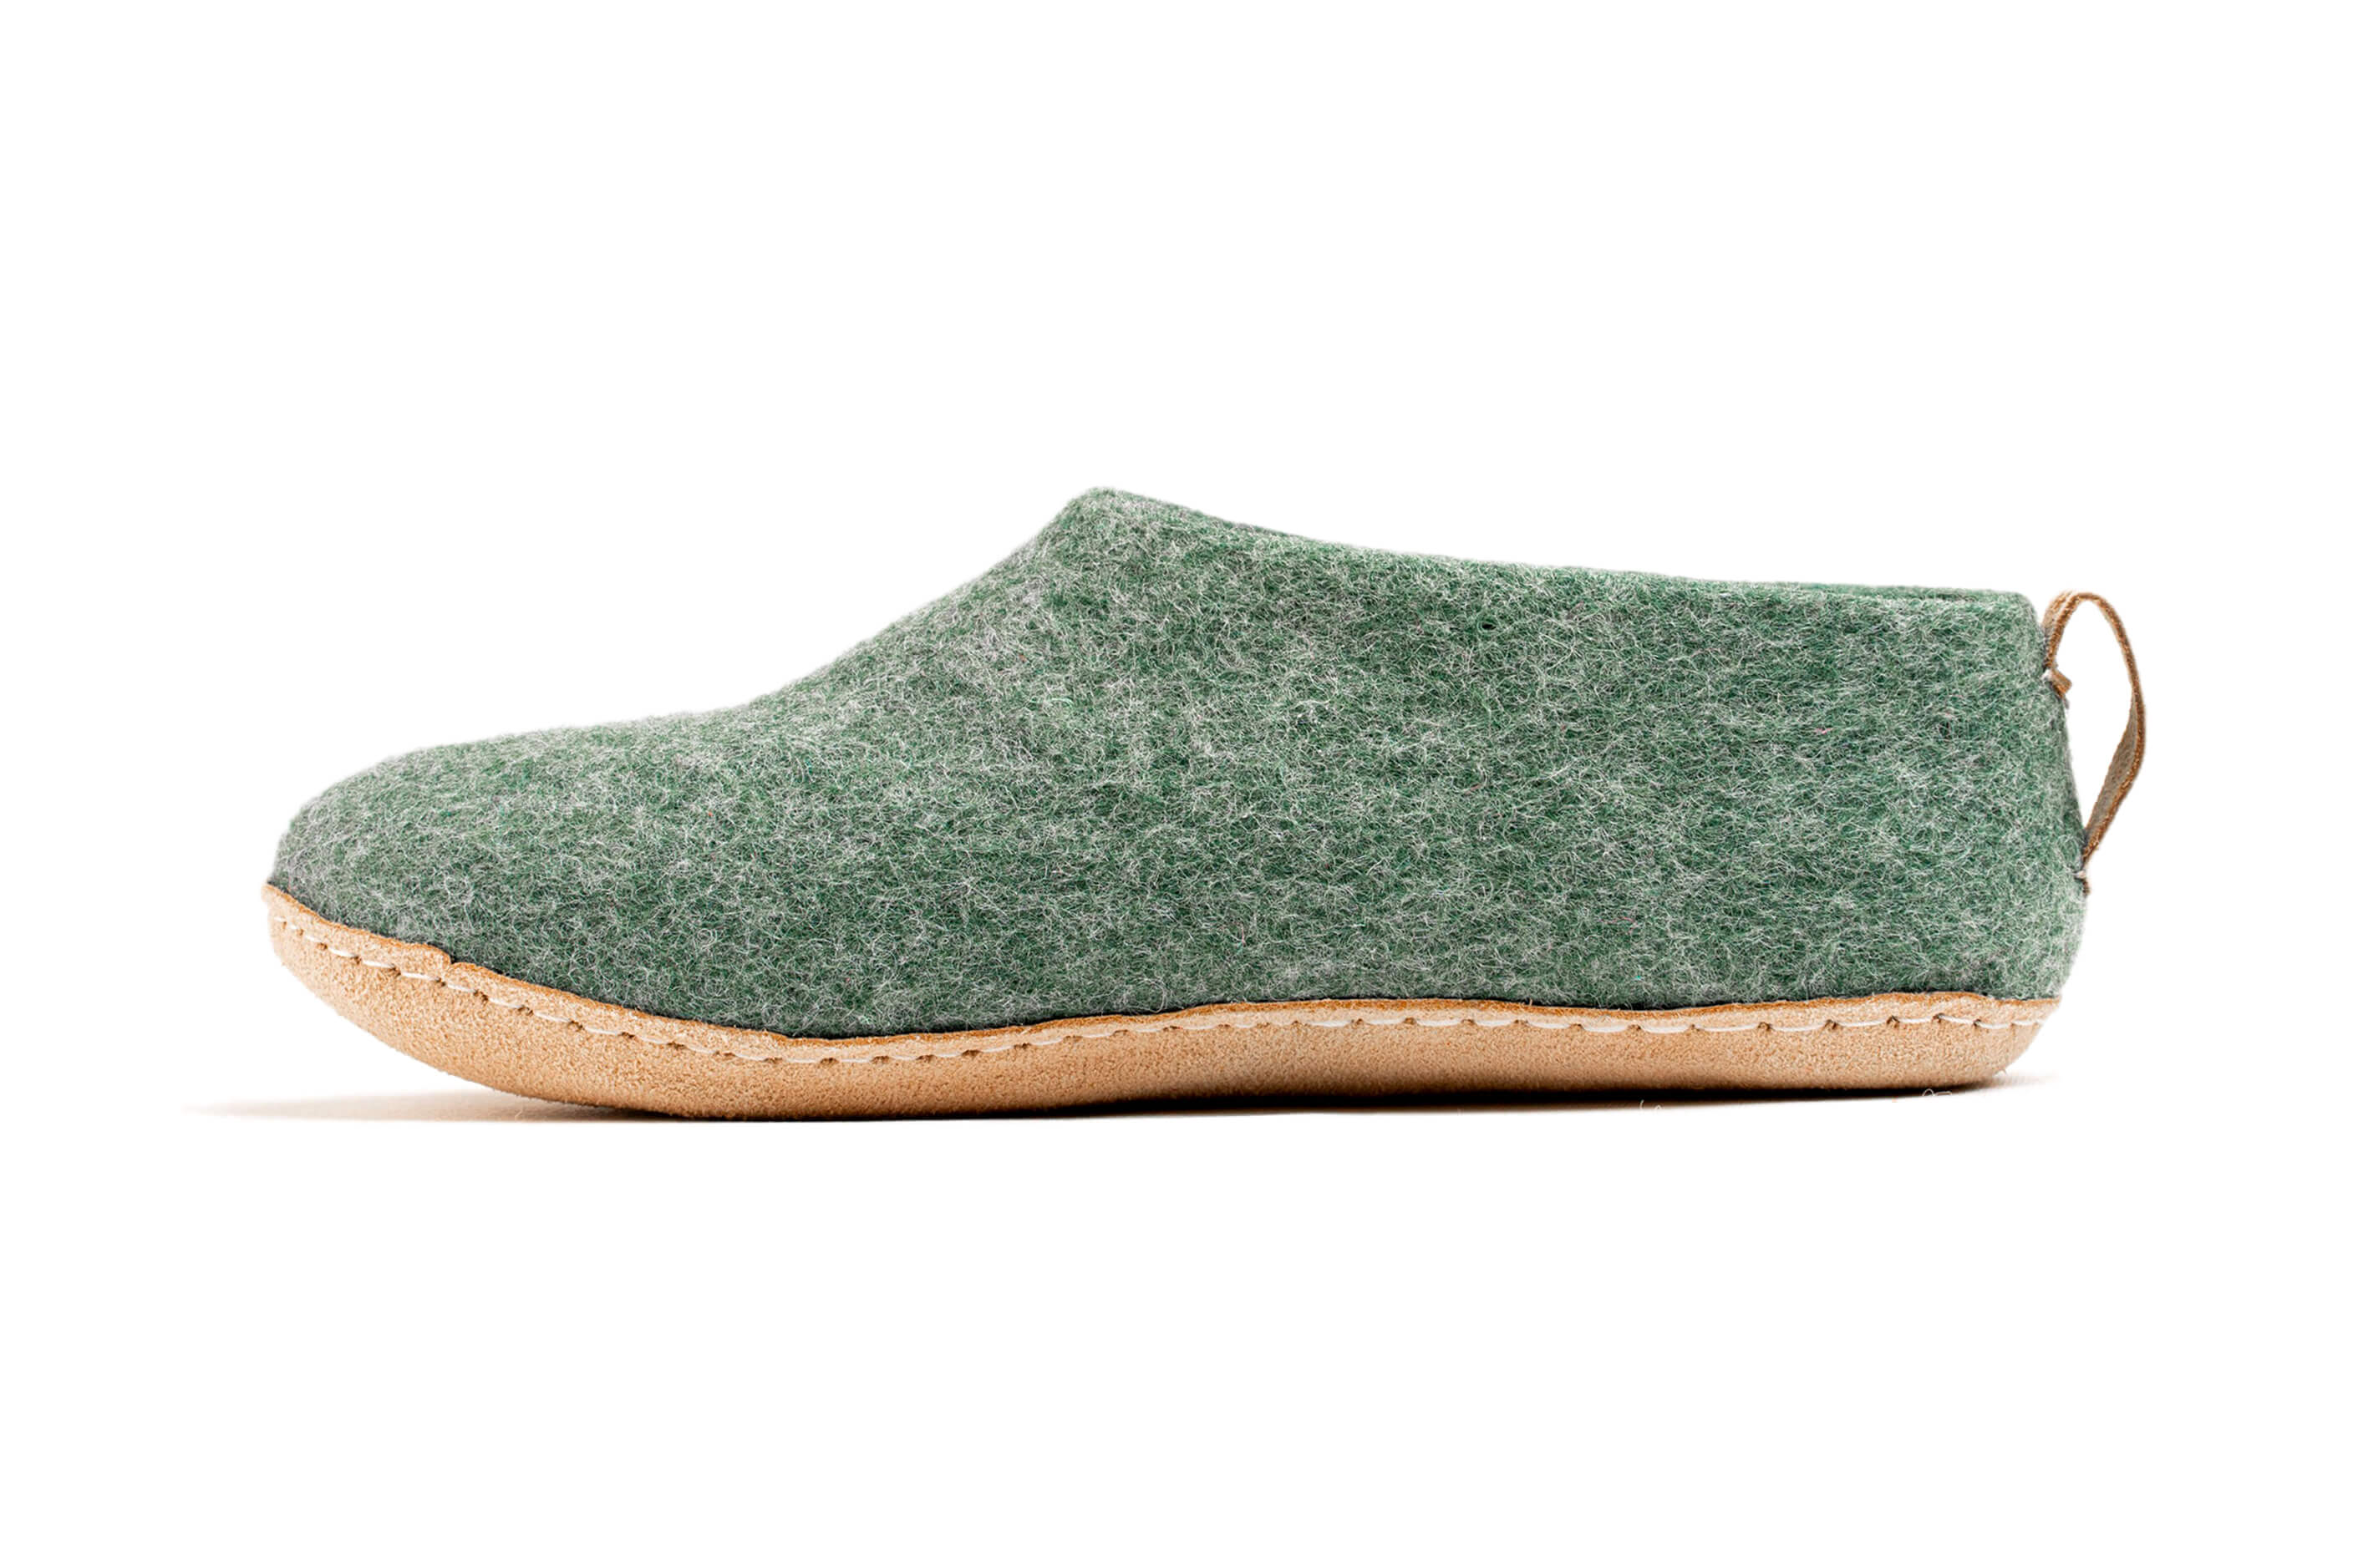 Indoor Shoes With Leather Sole - Jungle Green